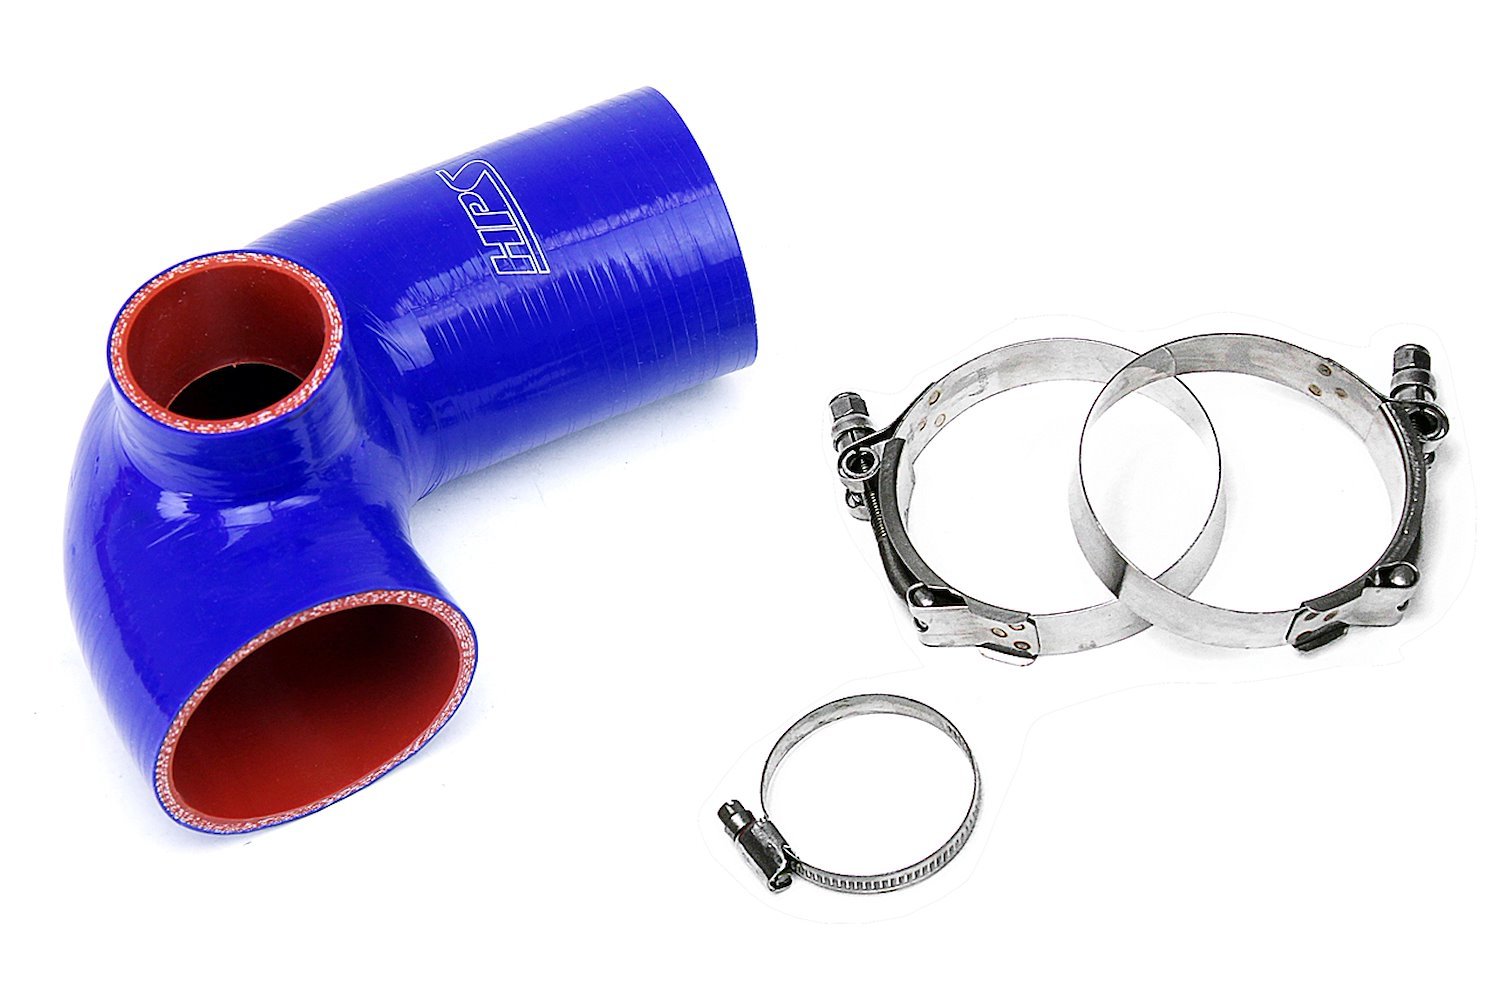 57-1494-BLUE Silicone Air Intake, Replace Stock Restrictive Air Intake, Improve Throttle Response, No Heat Soak